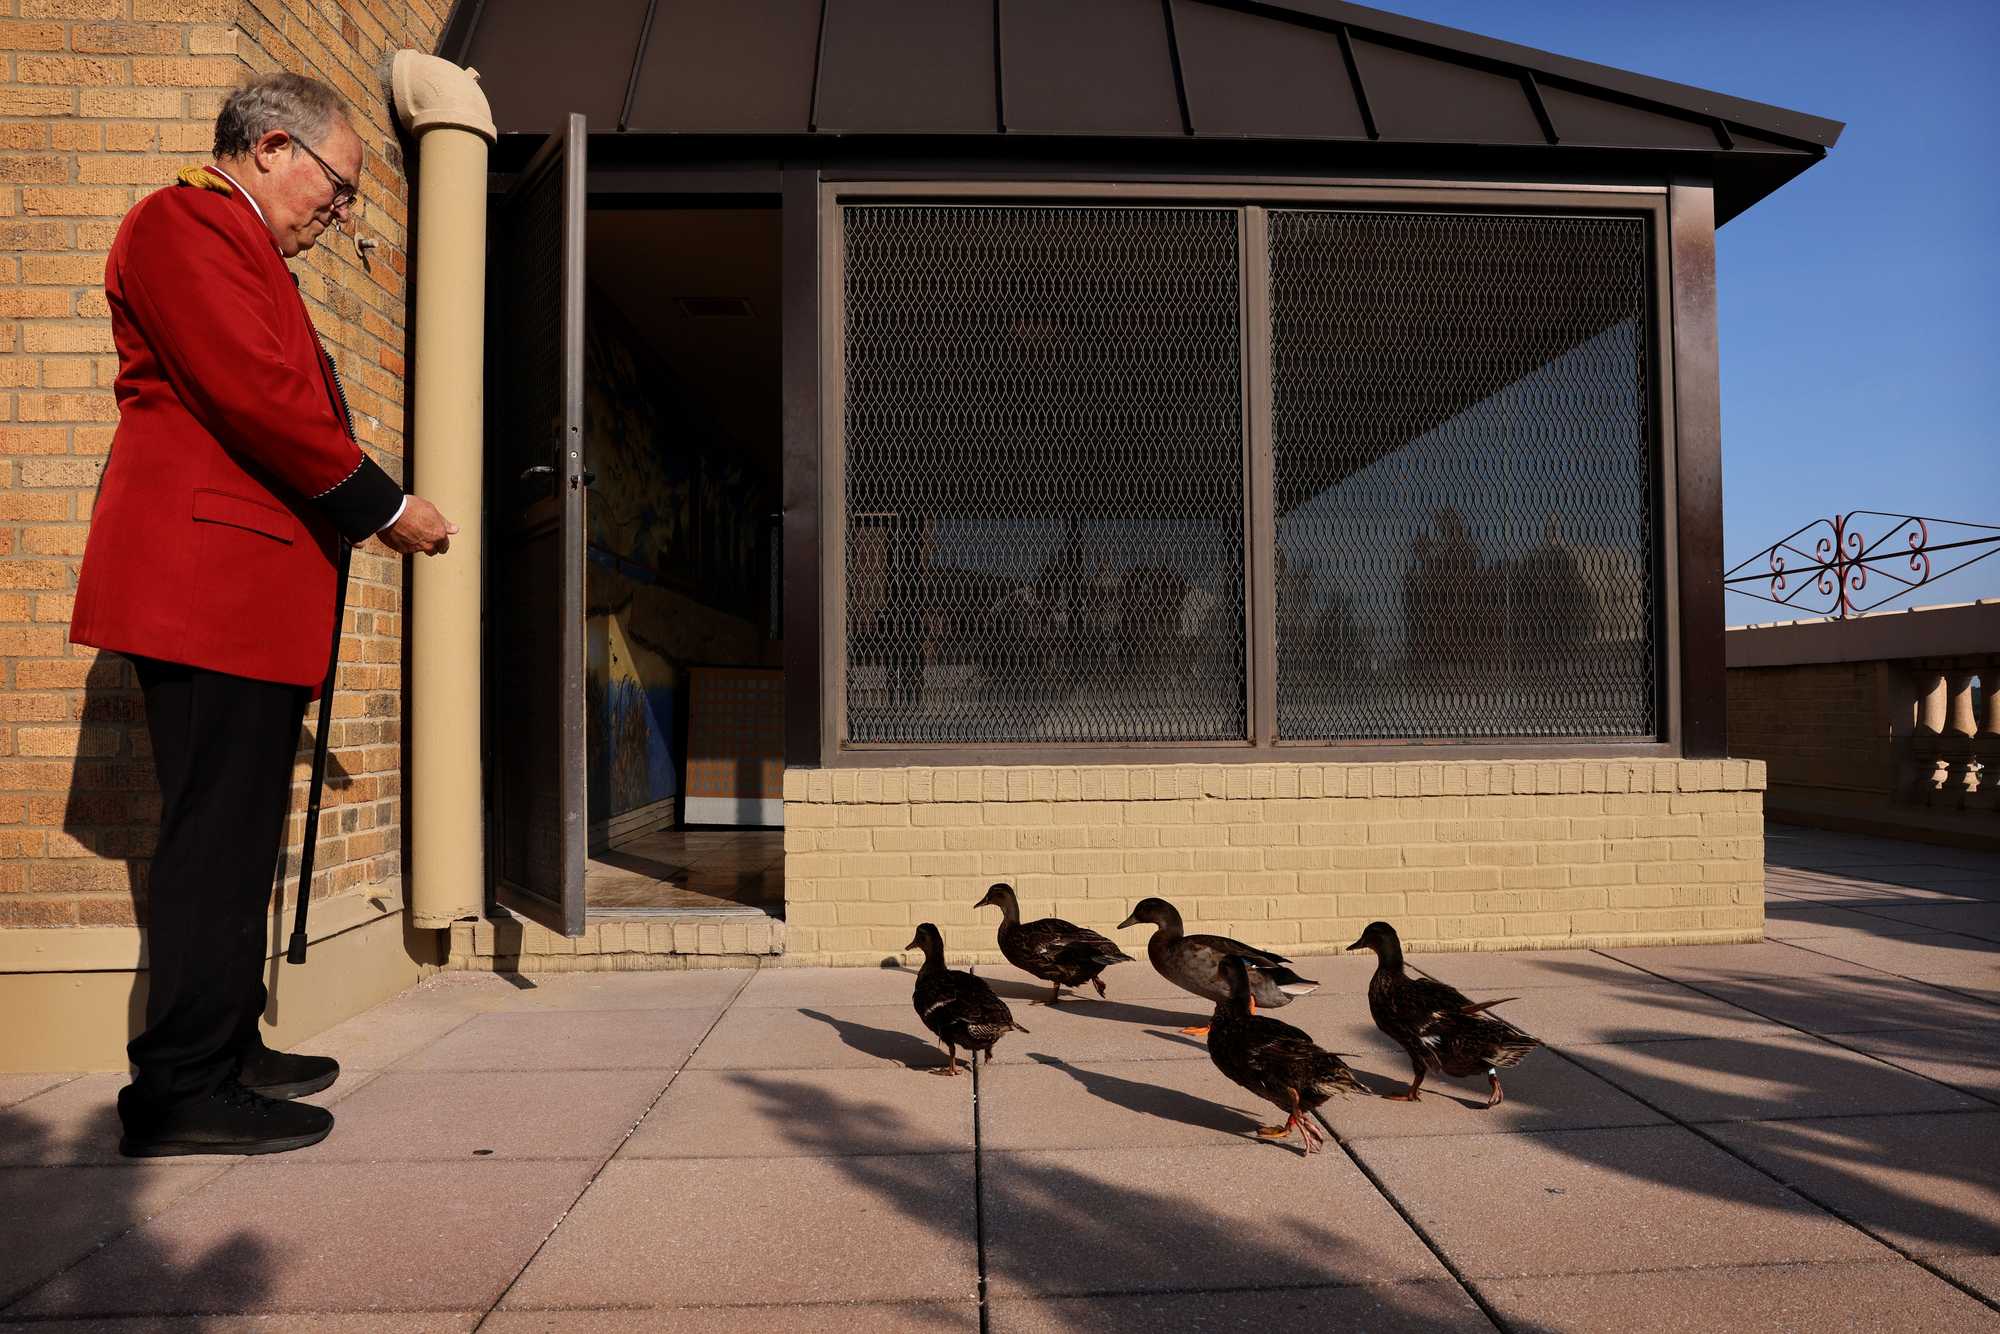 Ducks entered their rooftop penthouse while being escorted by assistant duckmaster Doug Weatherford from the lobby fountain at the Peabody Hotel.